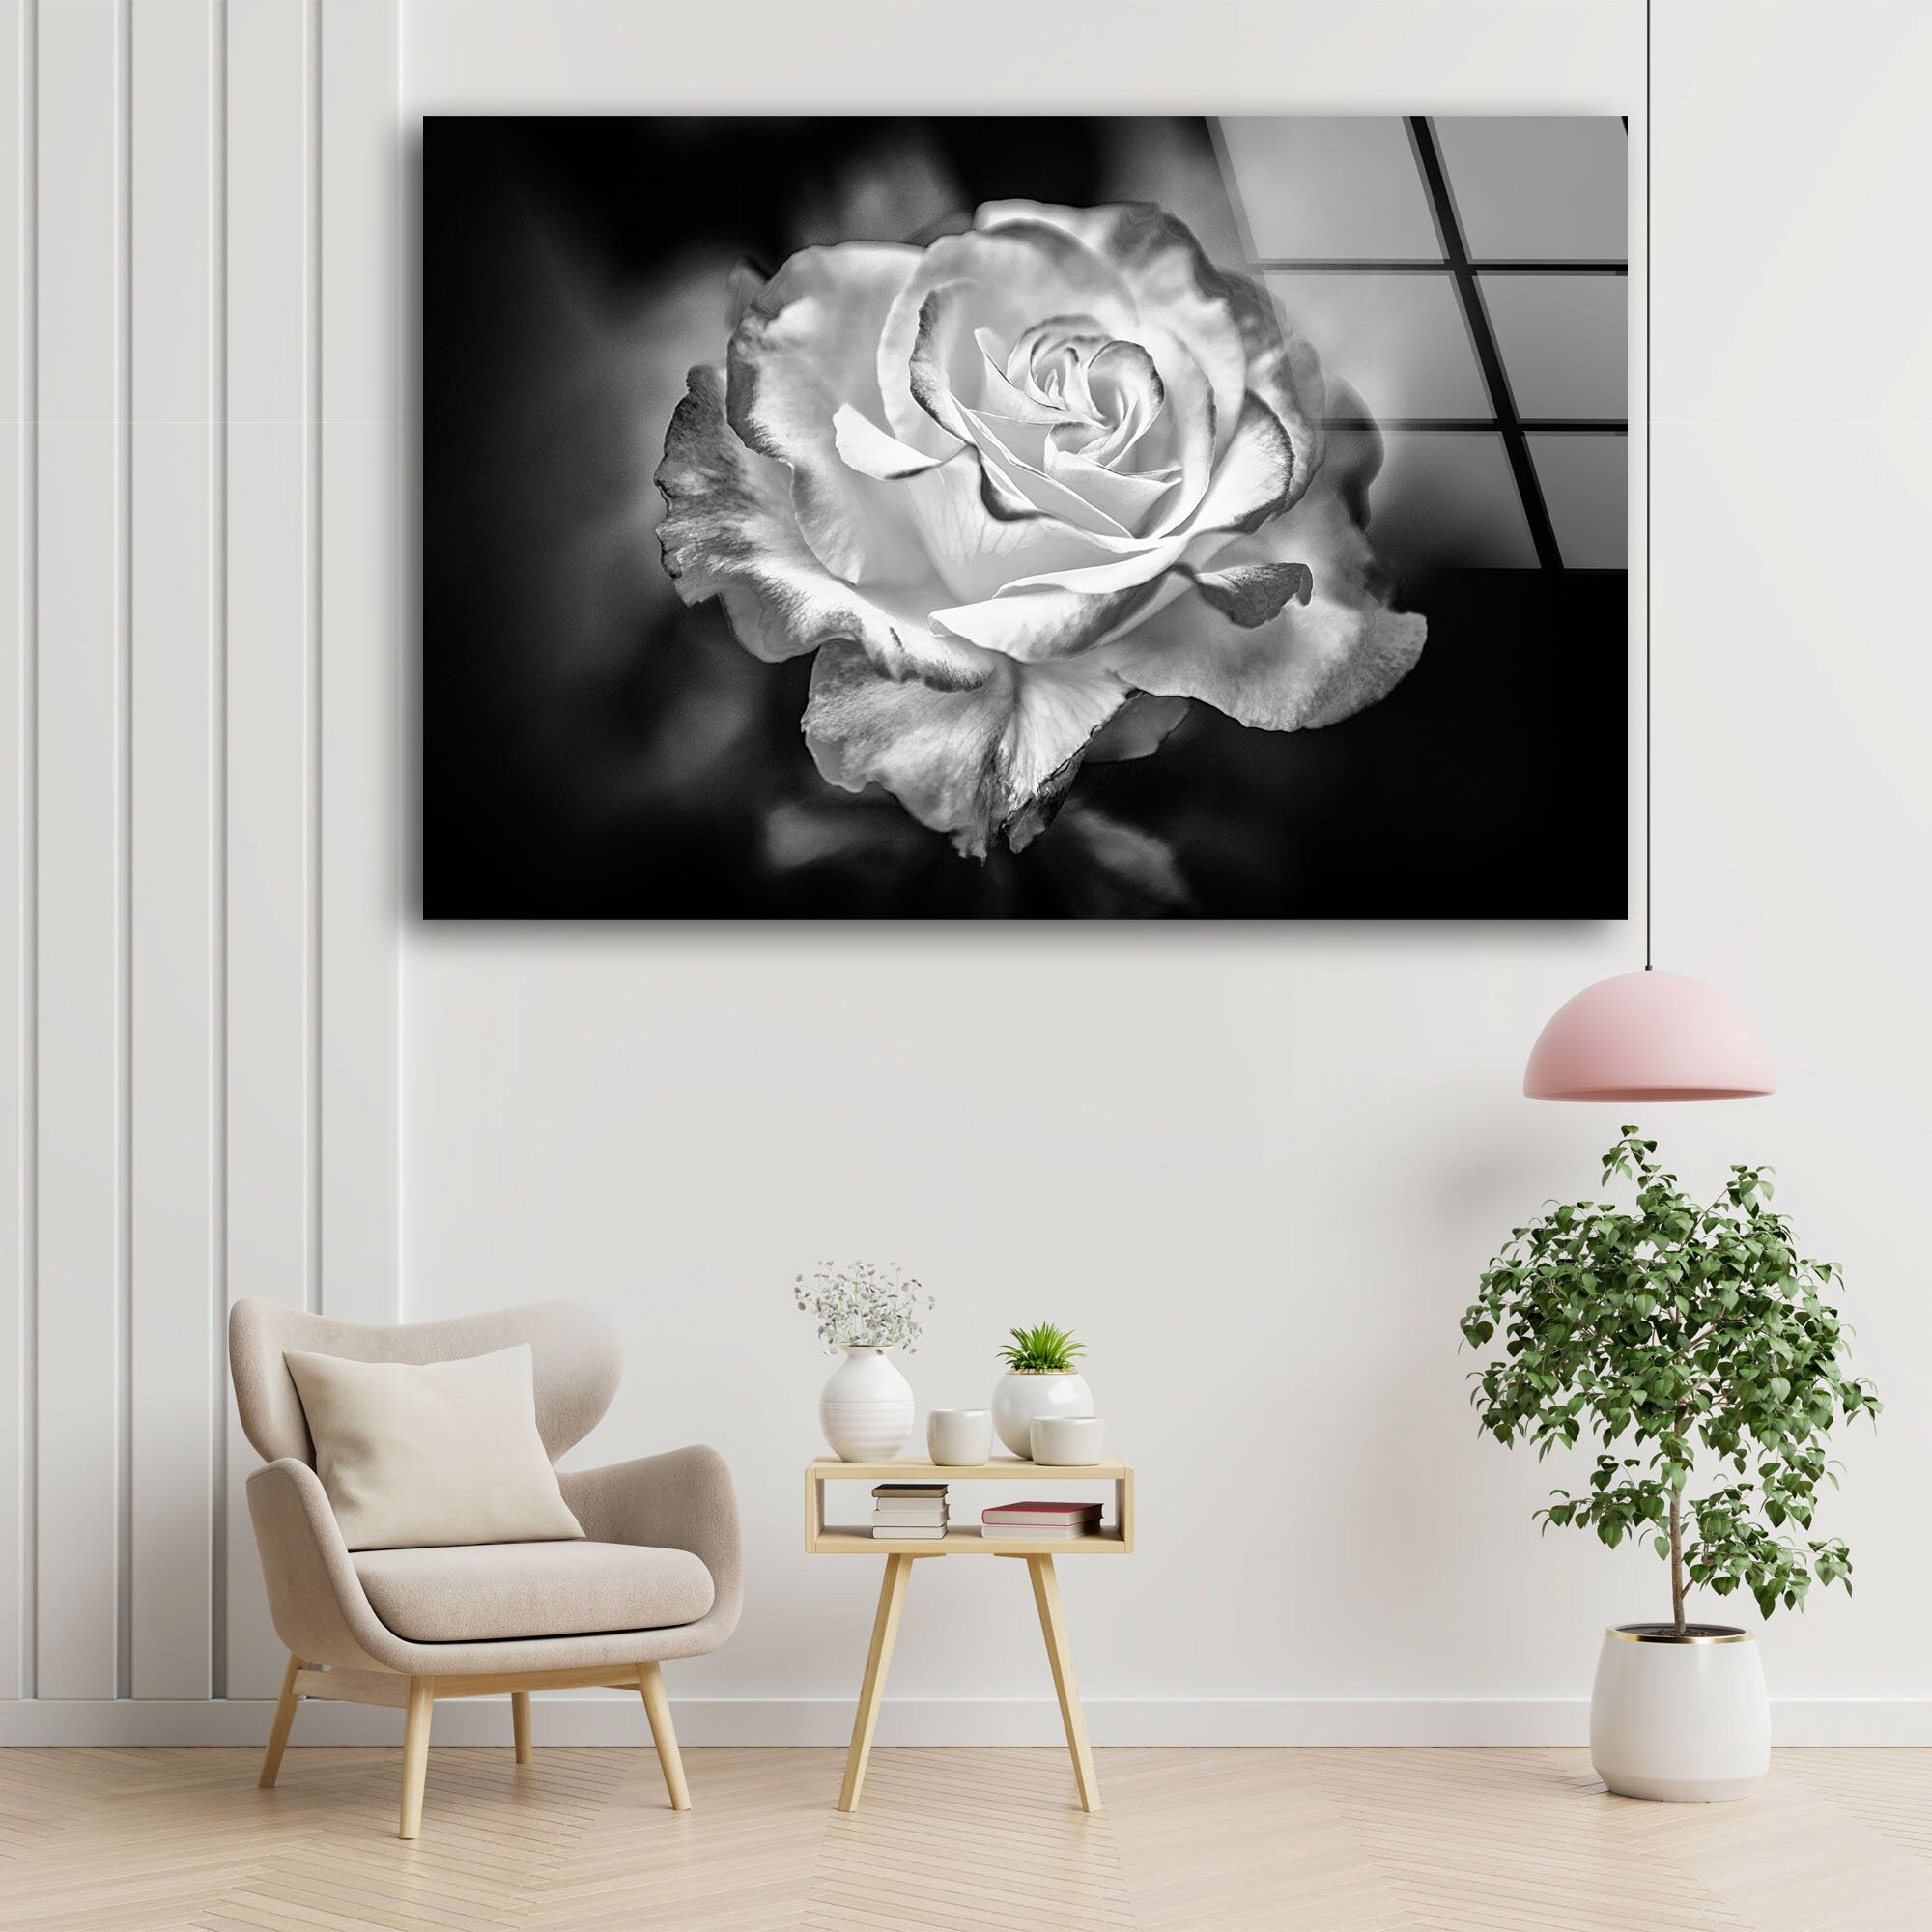 Black and White Rose Tempered Glass Wall Art